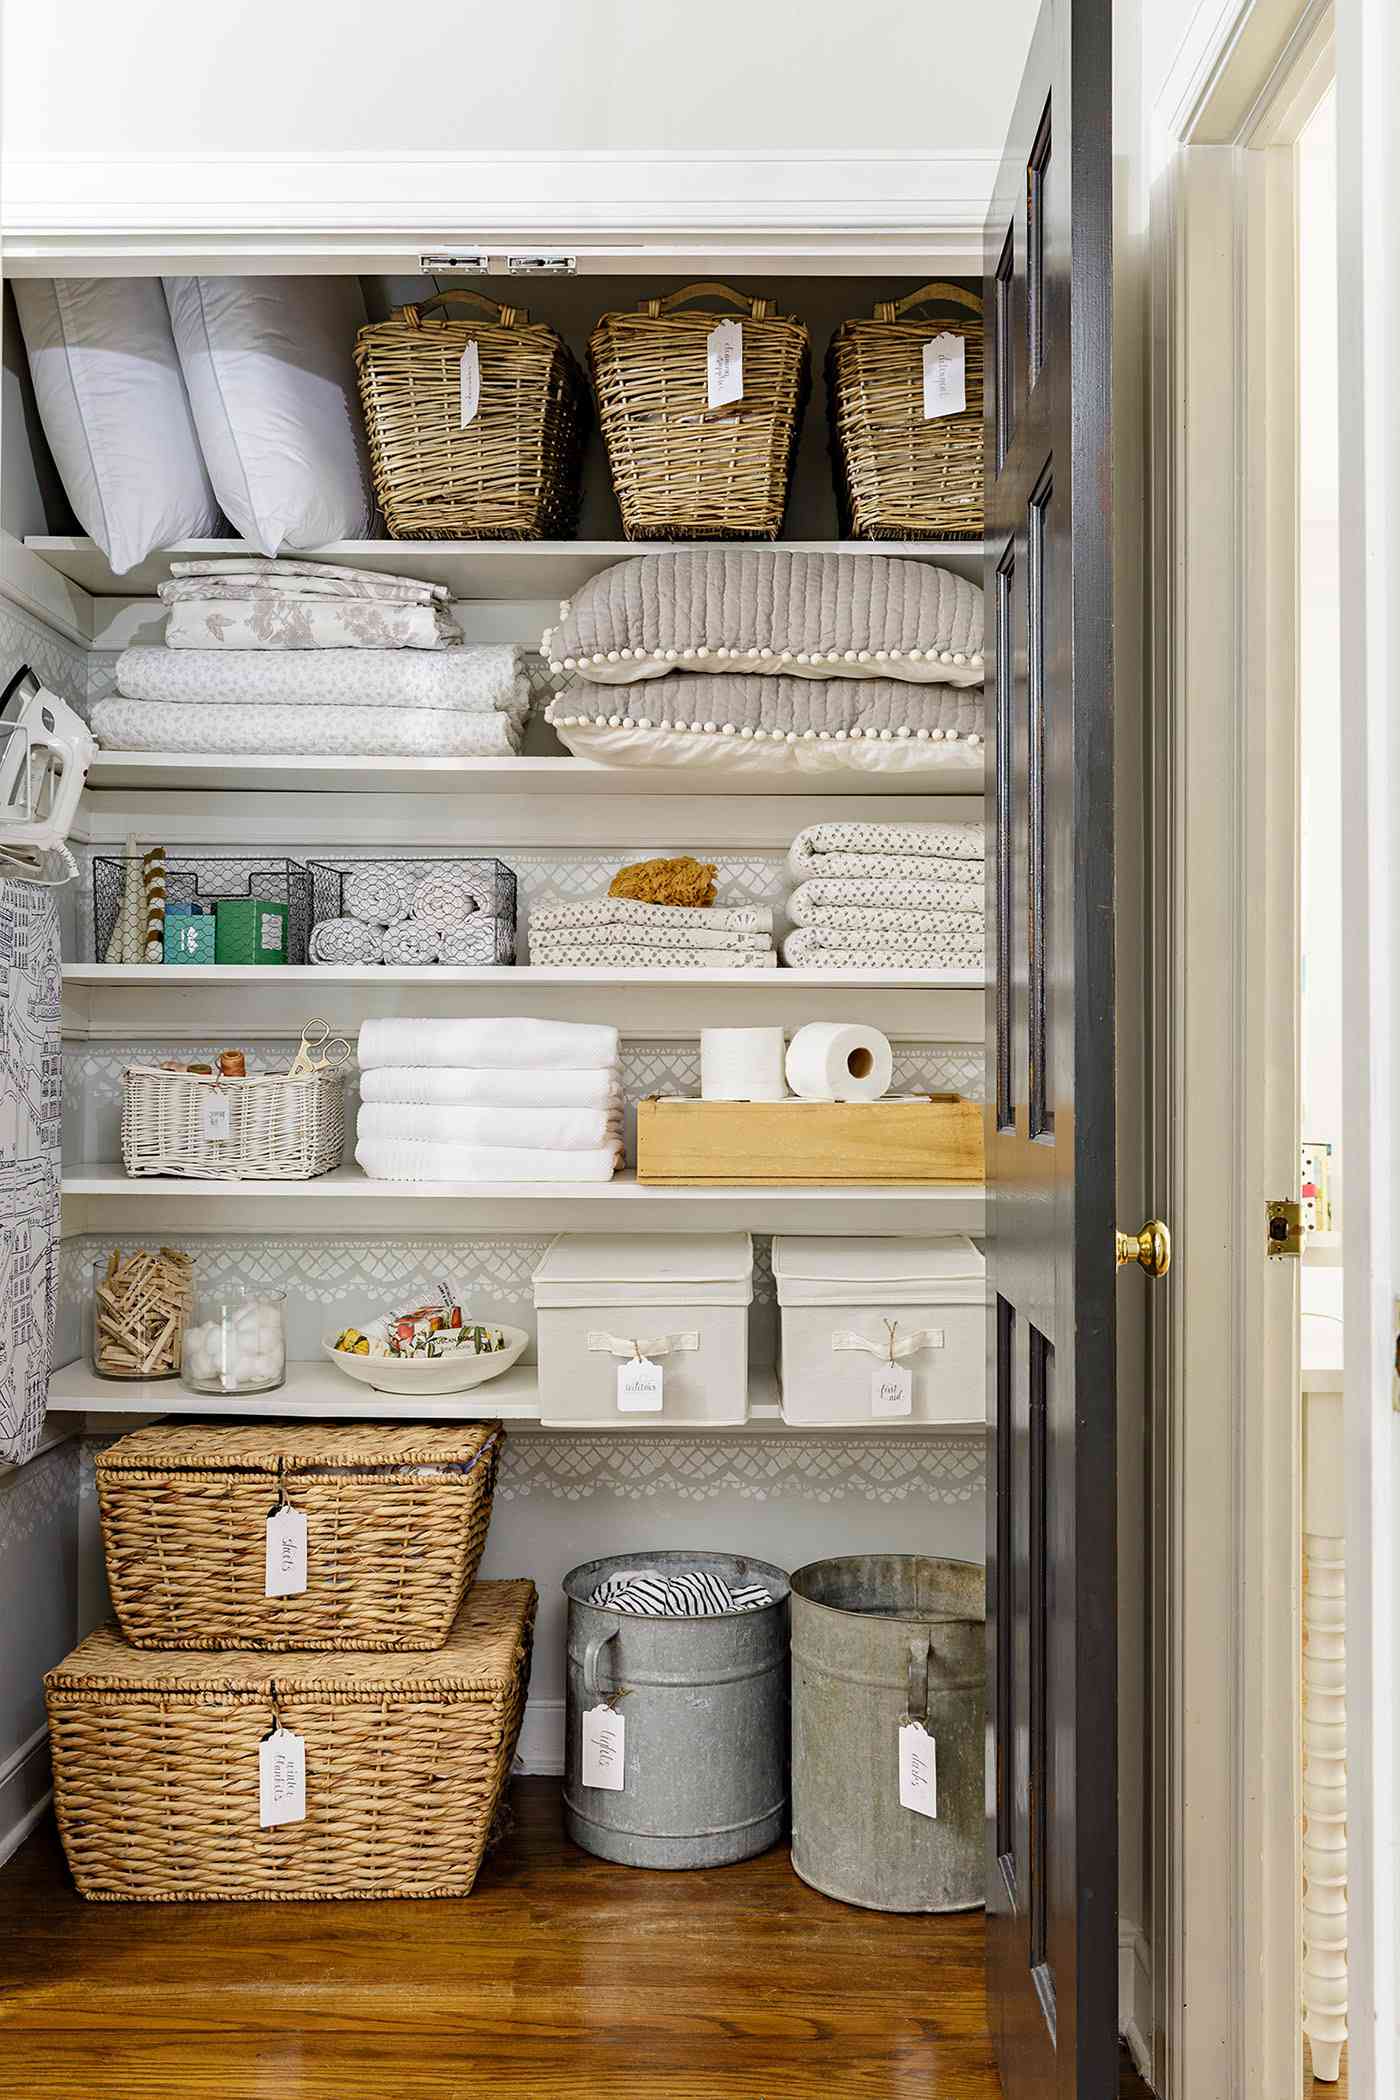 linen closet organized with bins and baskets